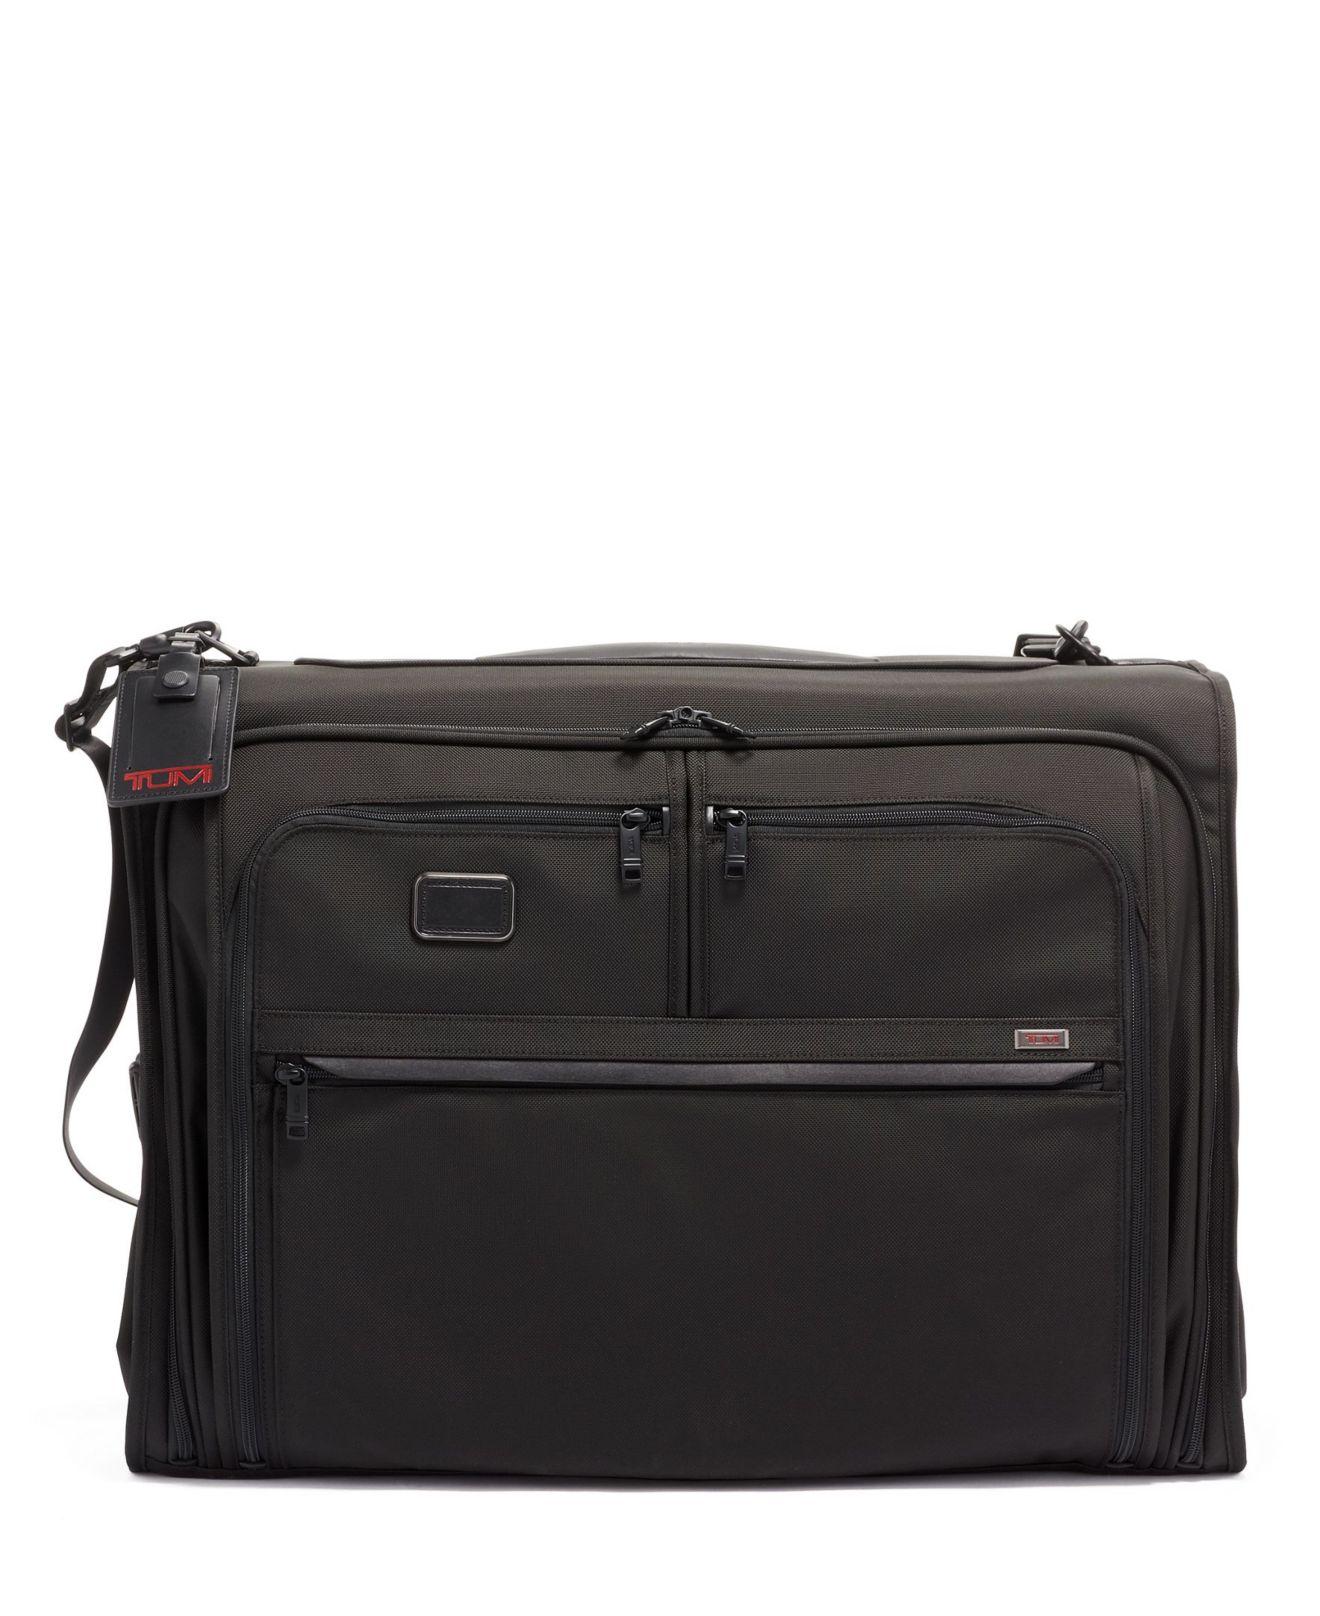 Tumi Synthetic Alpha 3 Classic Garment Bag in Black - Save 20% - Lyst